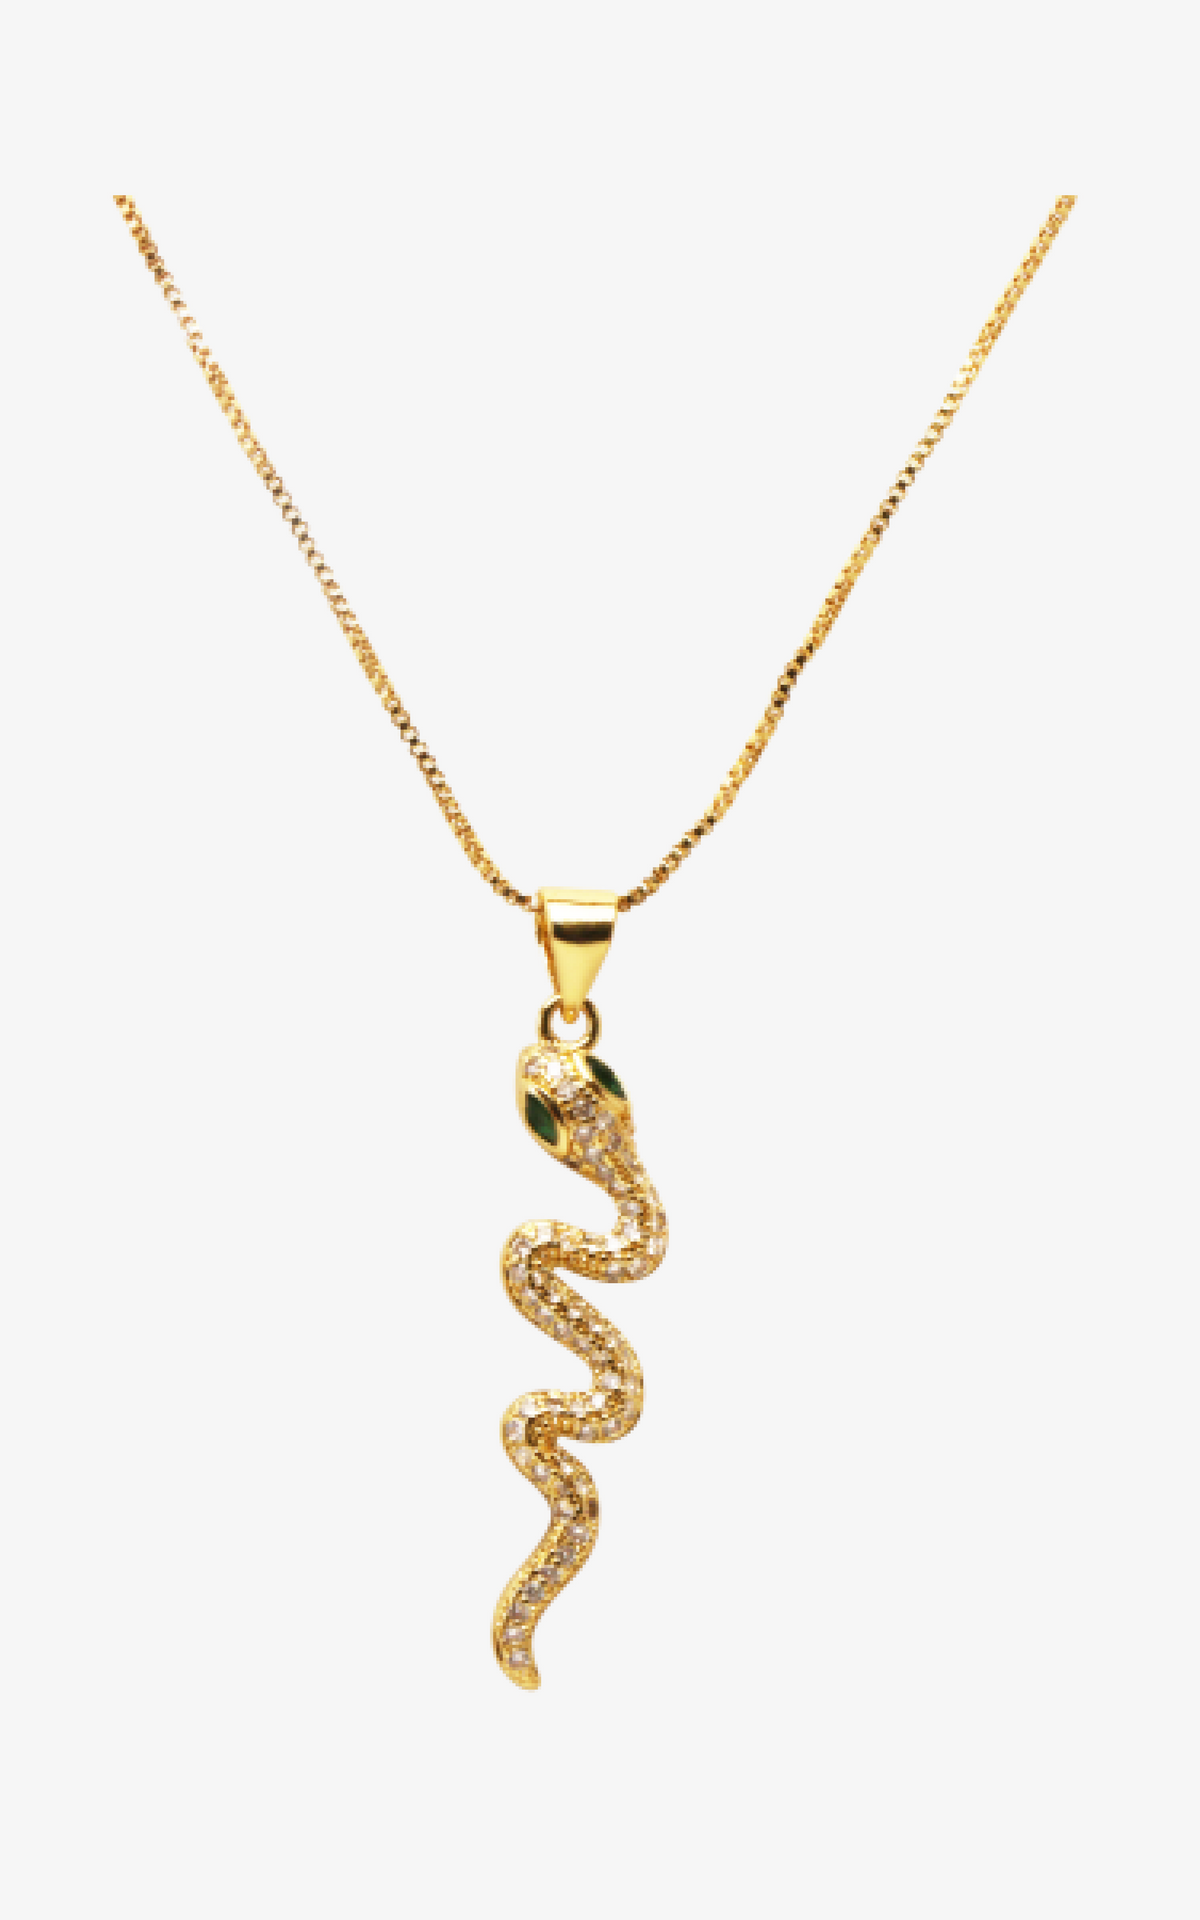 Serpentine Necklace with Jeweled Eyes